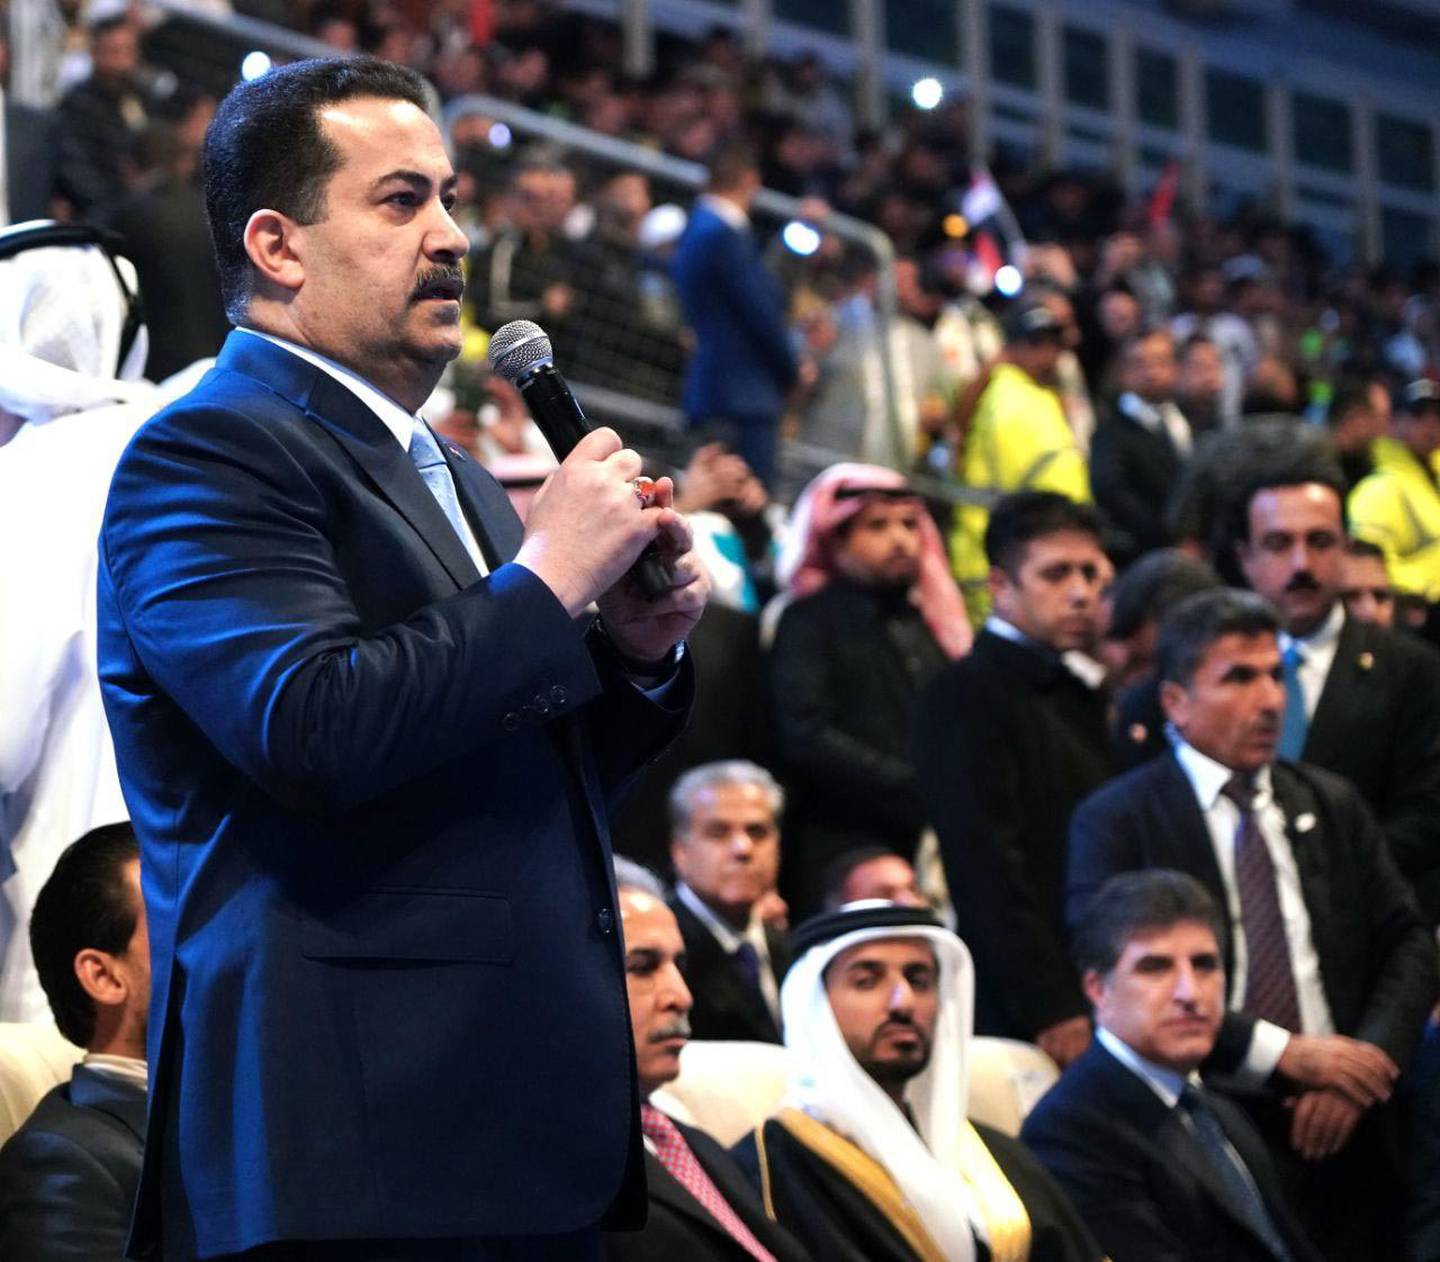 Prime Minister Mohammed Al Sudani at the 25th Arabian Gulf Cup opening ceremony, Basra International Stadium. Photo: Media Office of the Prime Minister, Iraq